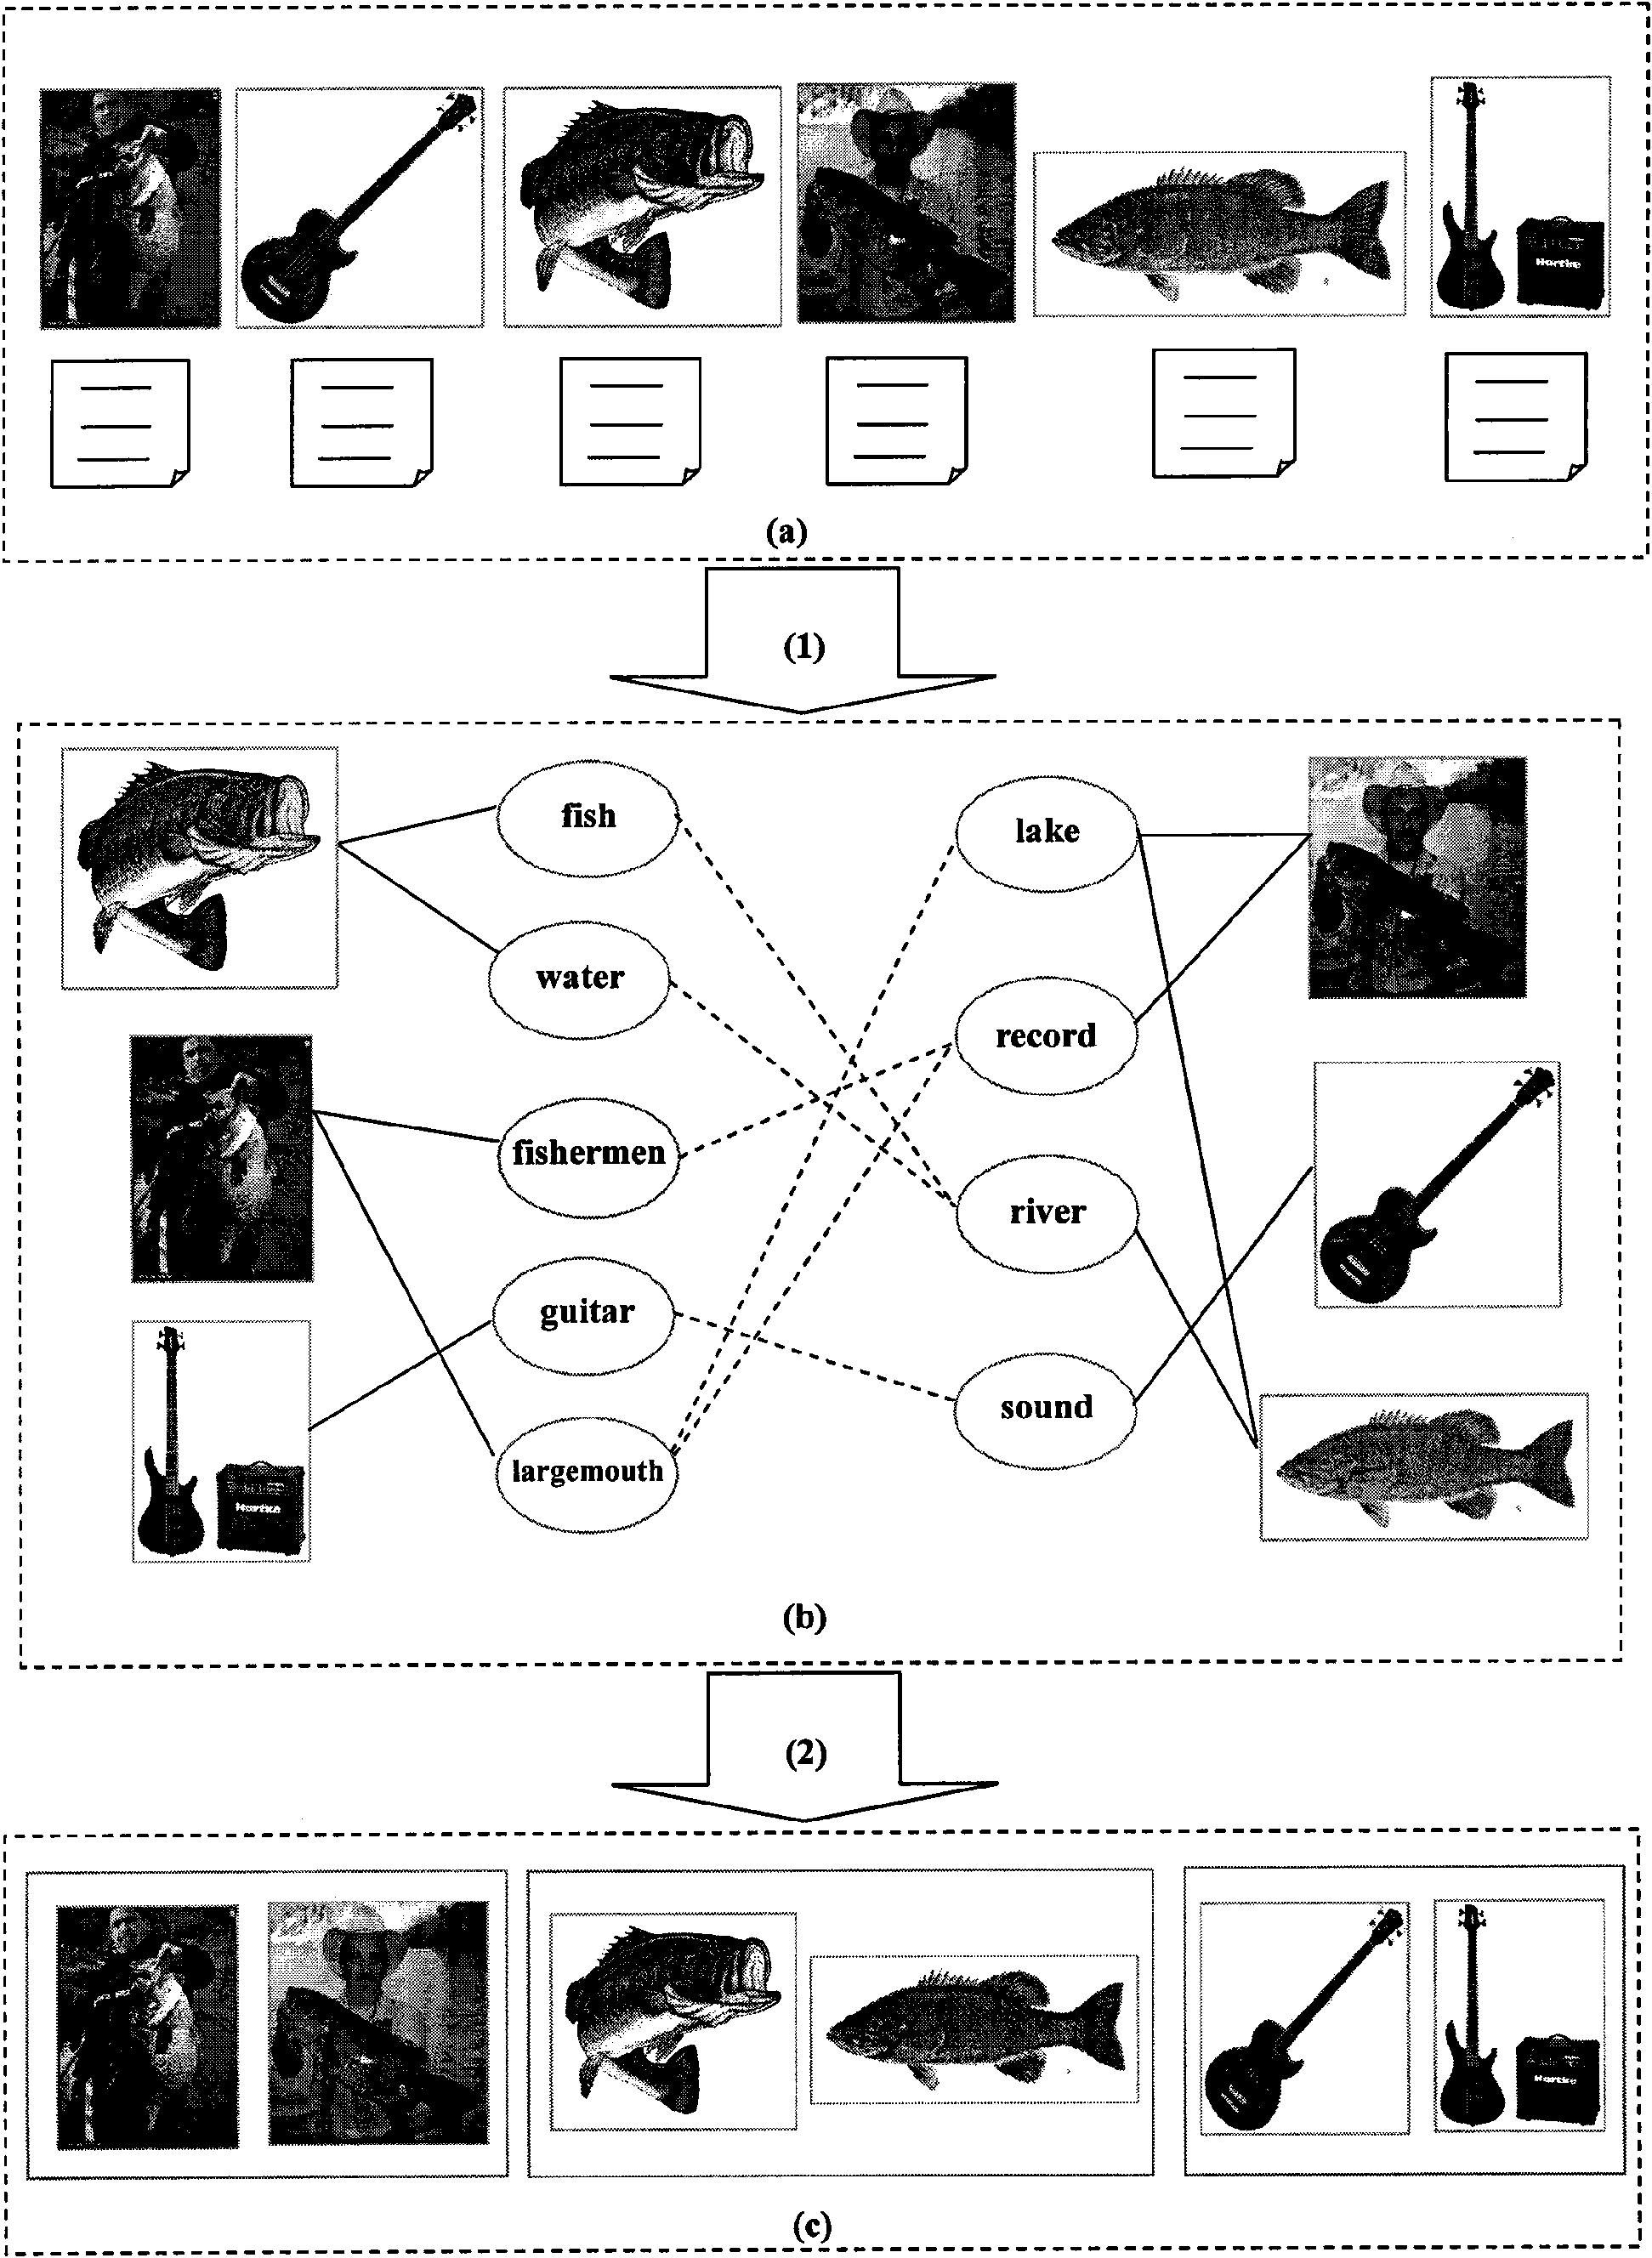 Web image clustering method based on image and text relevant mining